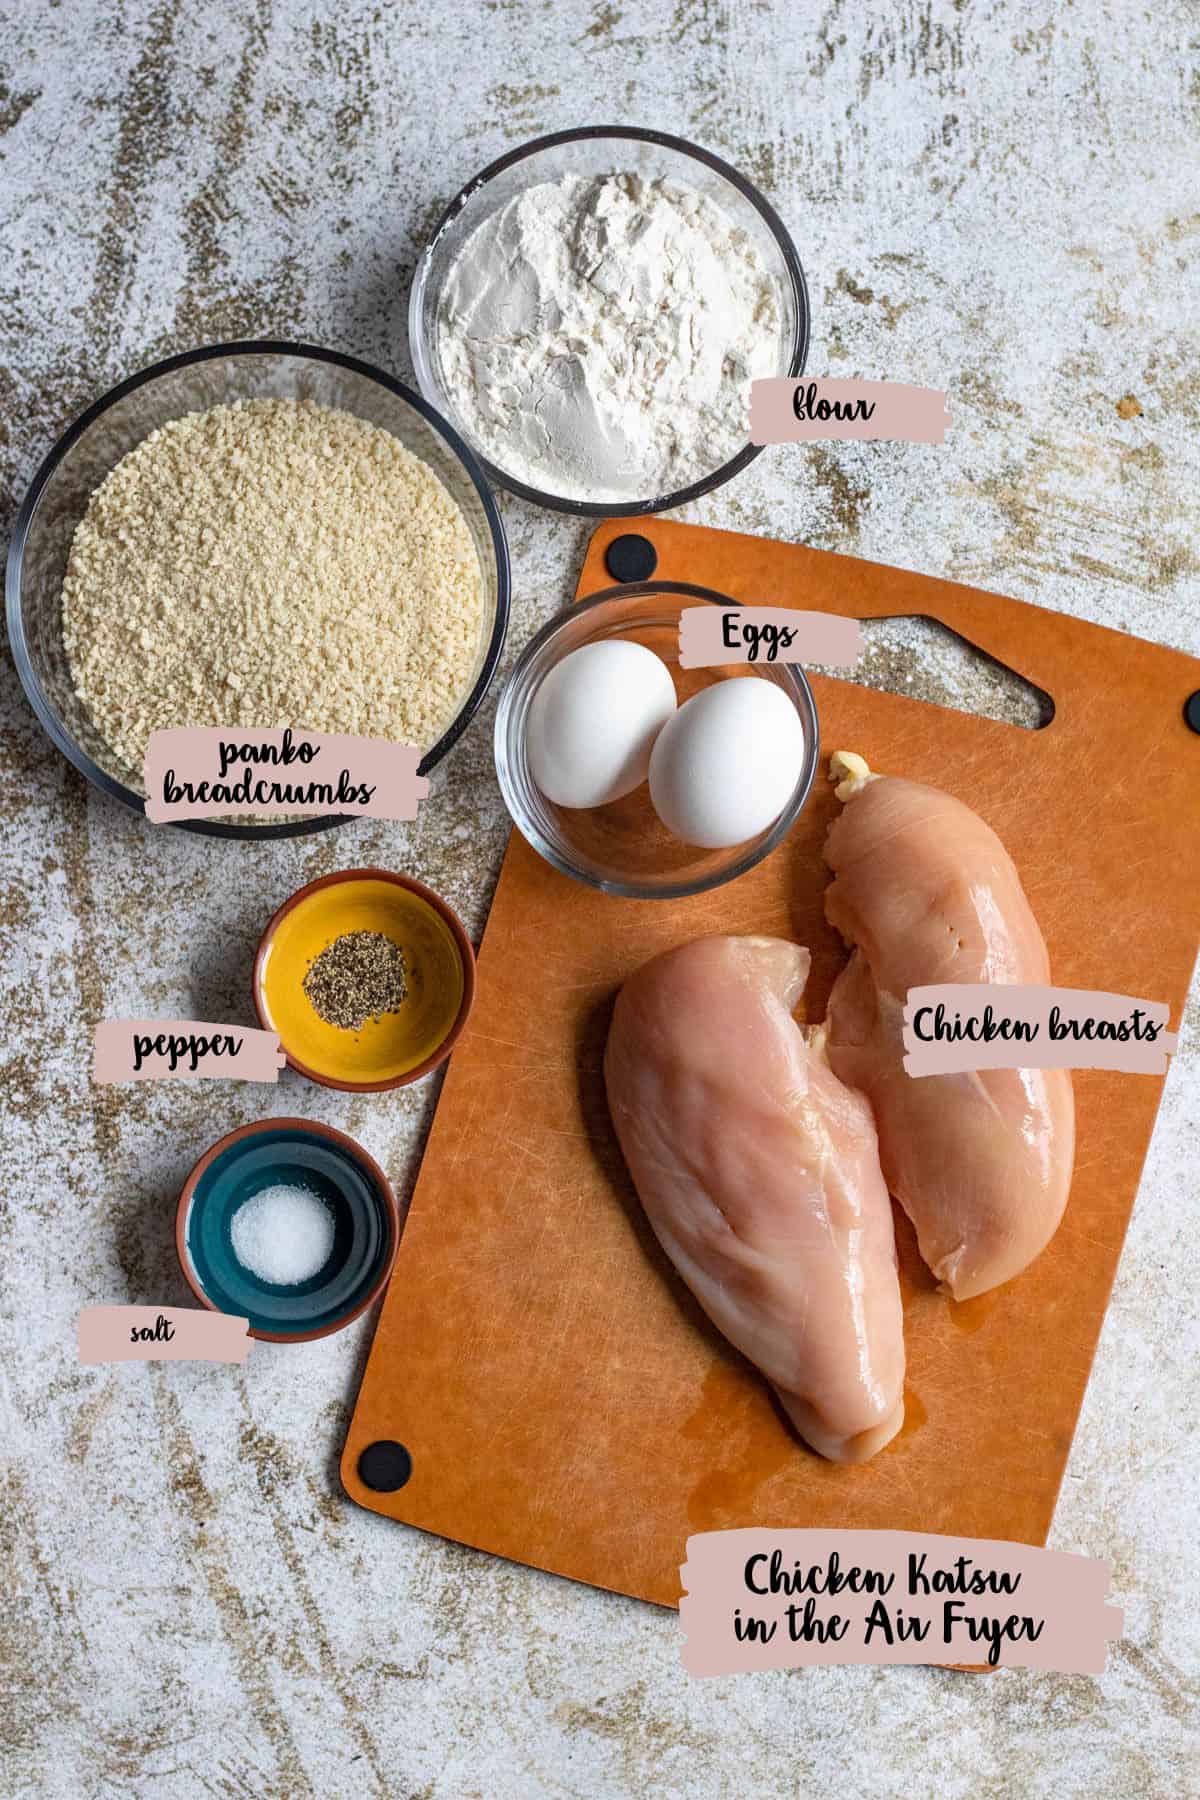 Ingredients shown are used to prepare chicken katsu in the air fryer. 